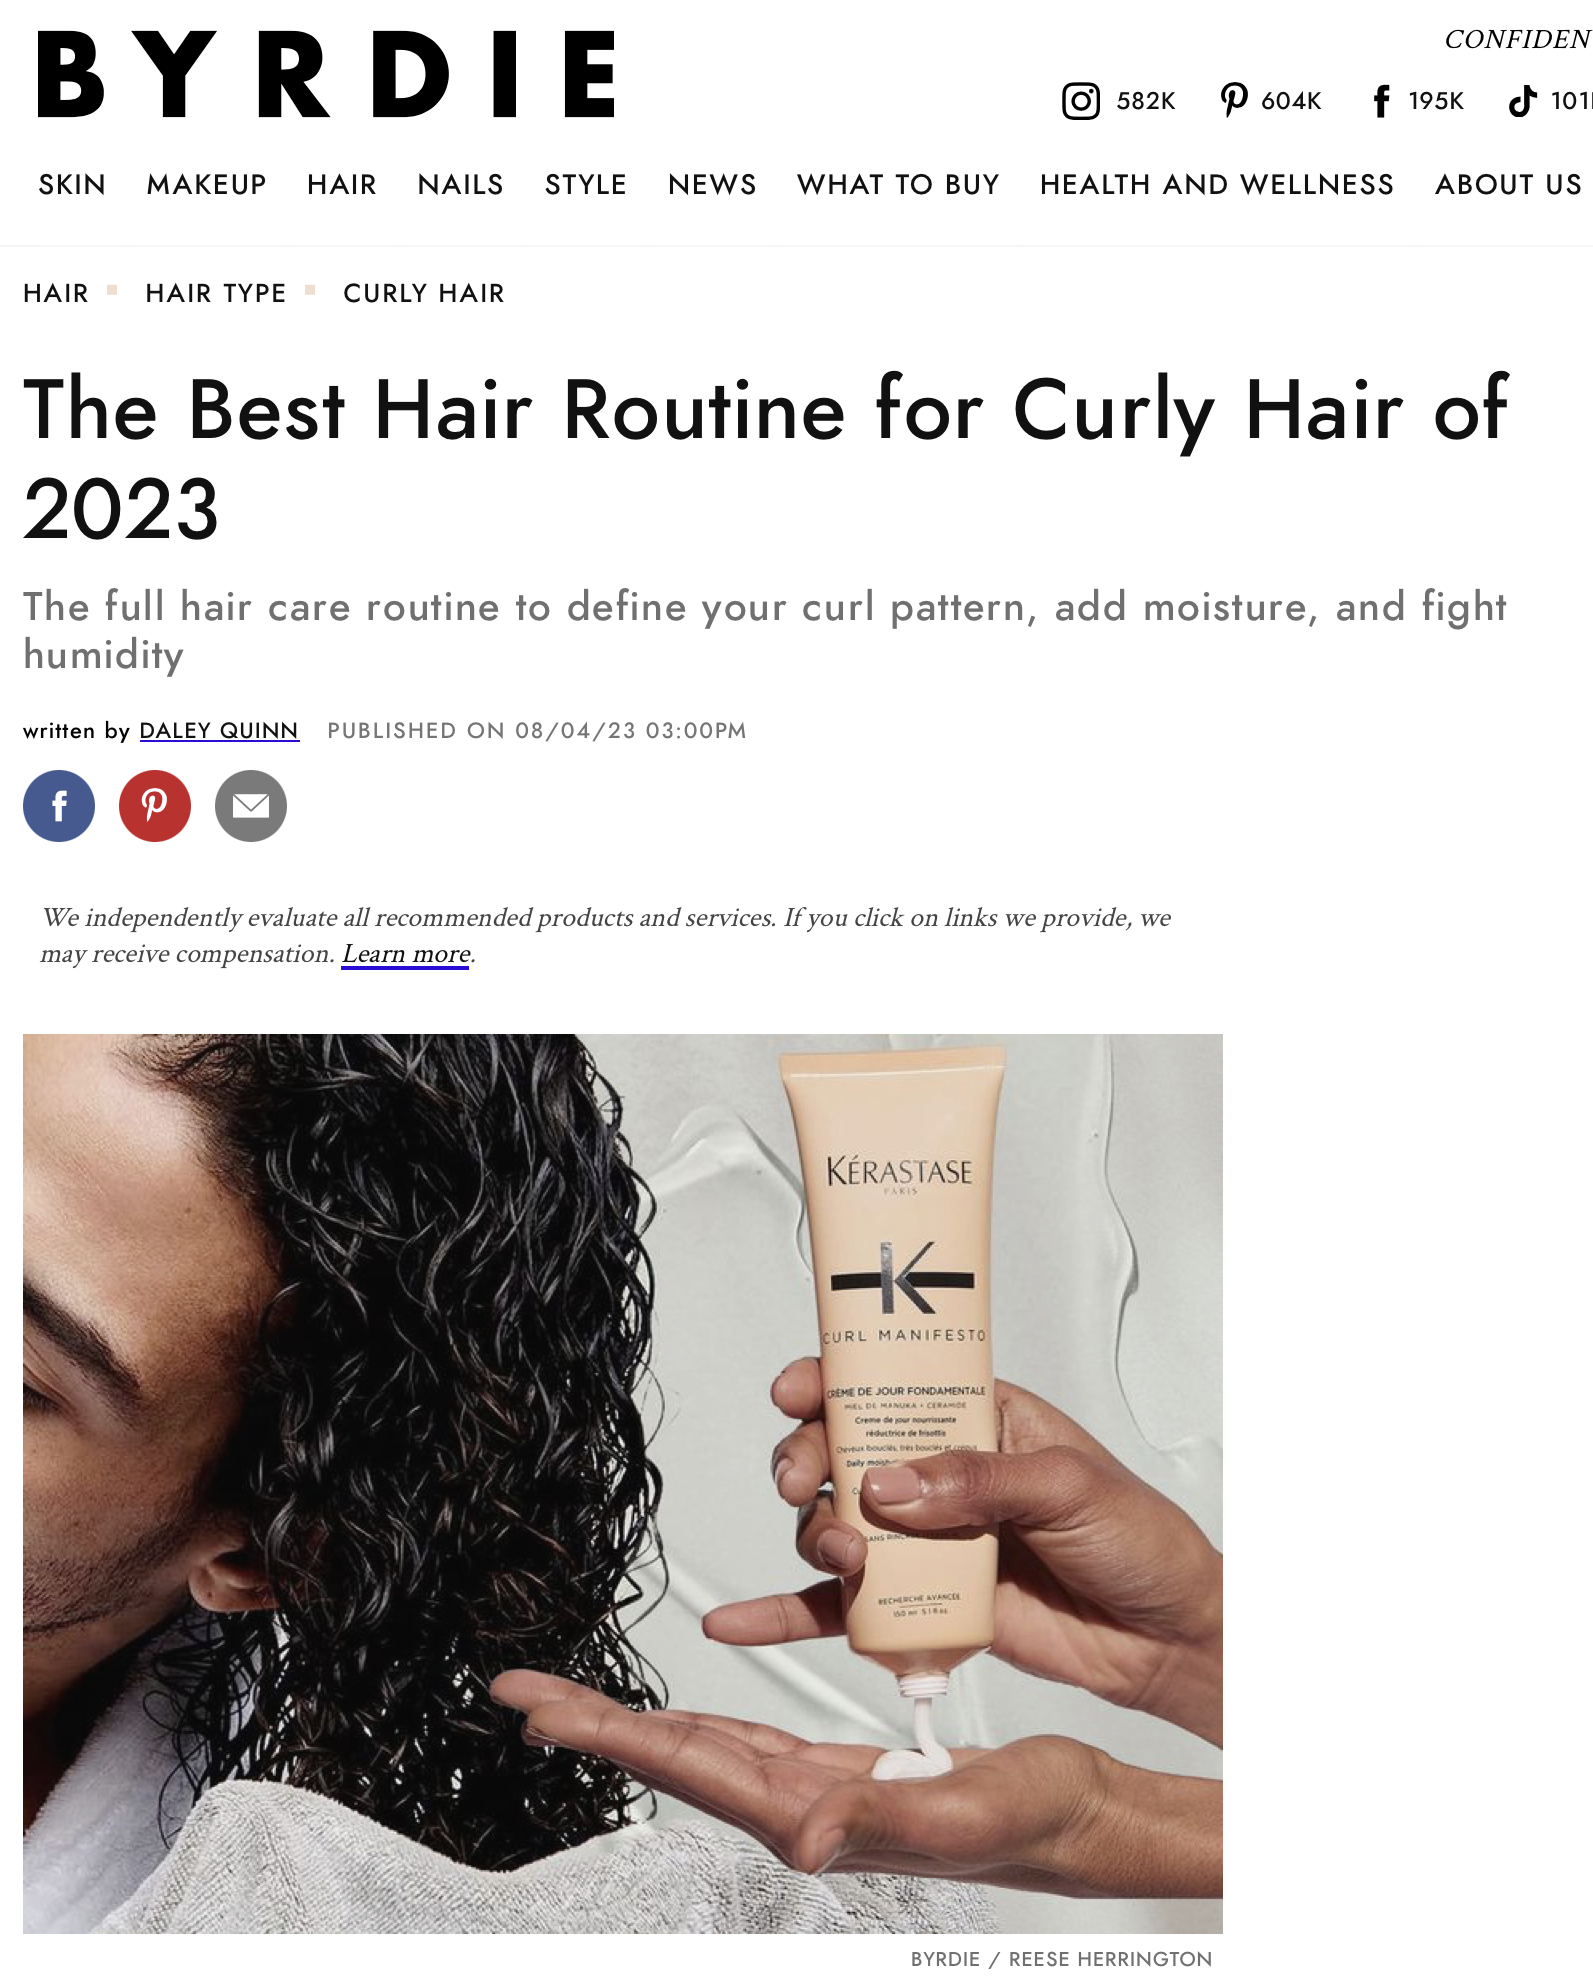 The Best Hair Routine for Curly Hair of 2023.png